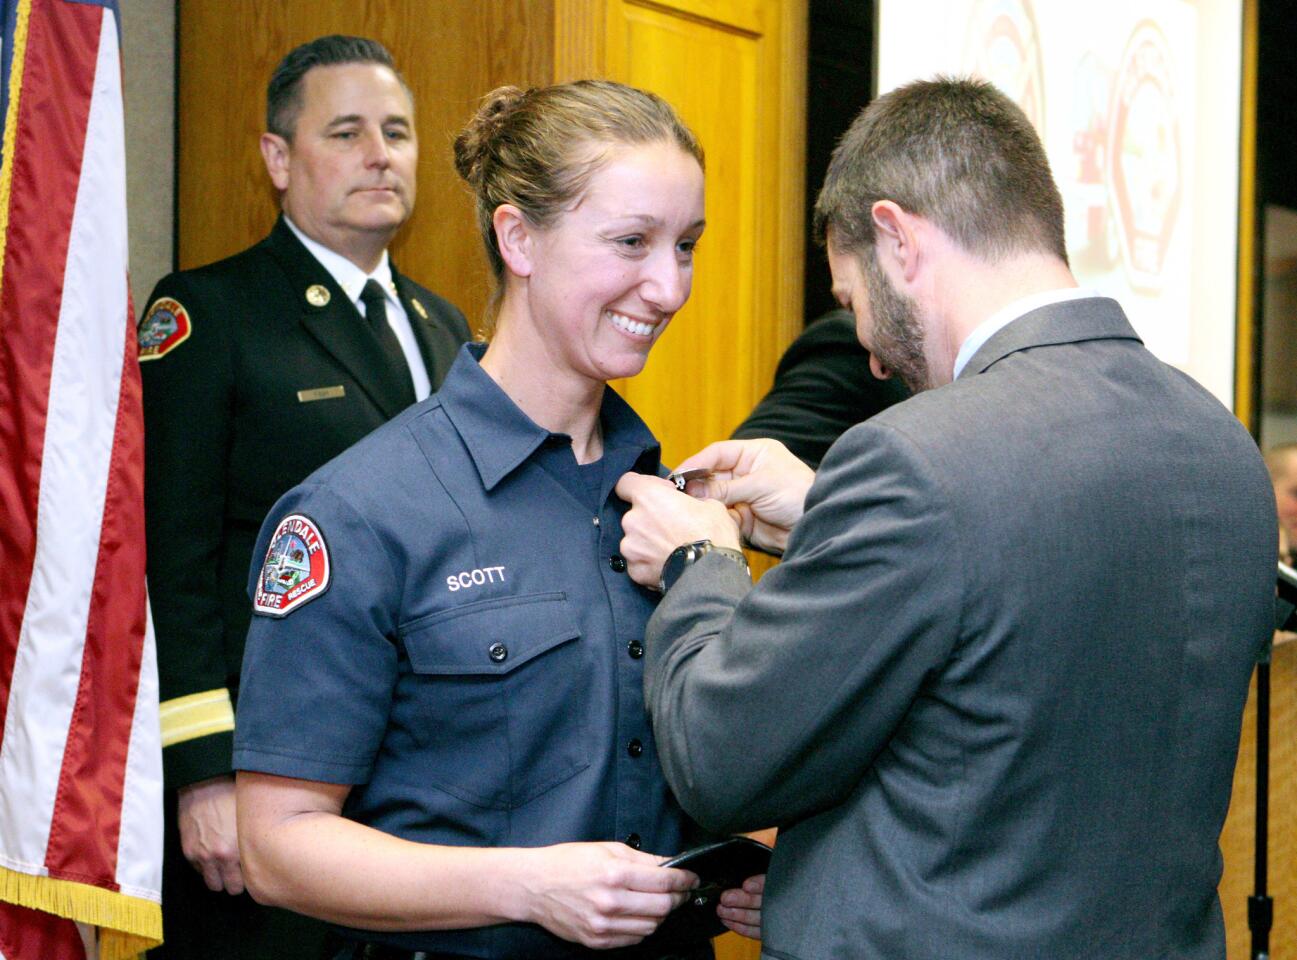 With Glendale Fire Dept. Chief Greg Fish looking on at rear, David Scott pins the badge on his wife and new Glendale firefighter Leslie Scott, at the Class of 2016 Burbank and Glendale Fire Departments Firefighter Recruit Academy graduation ceremony, at the Burbank Fire Dept. Training Center in Burbank, on Friday, Dec. 16, 2016. Glendale F.D. had 13 graduates and Burbank had 8 graduates.